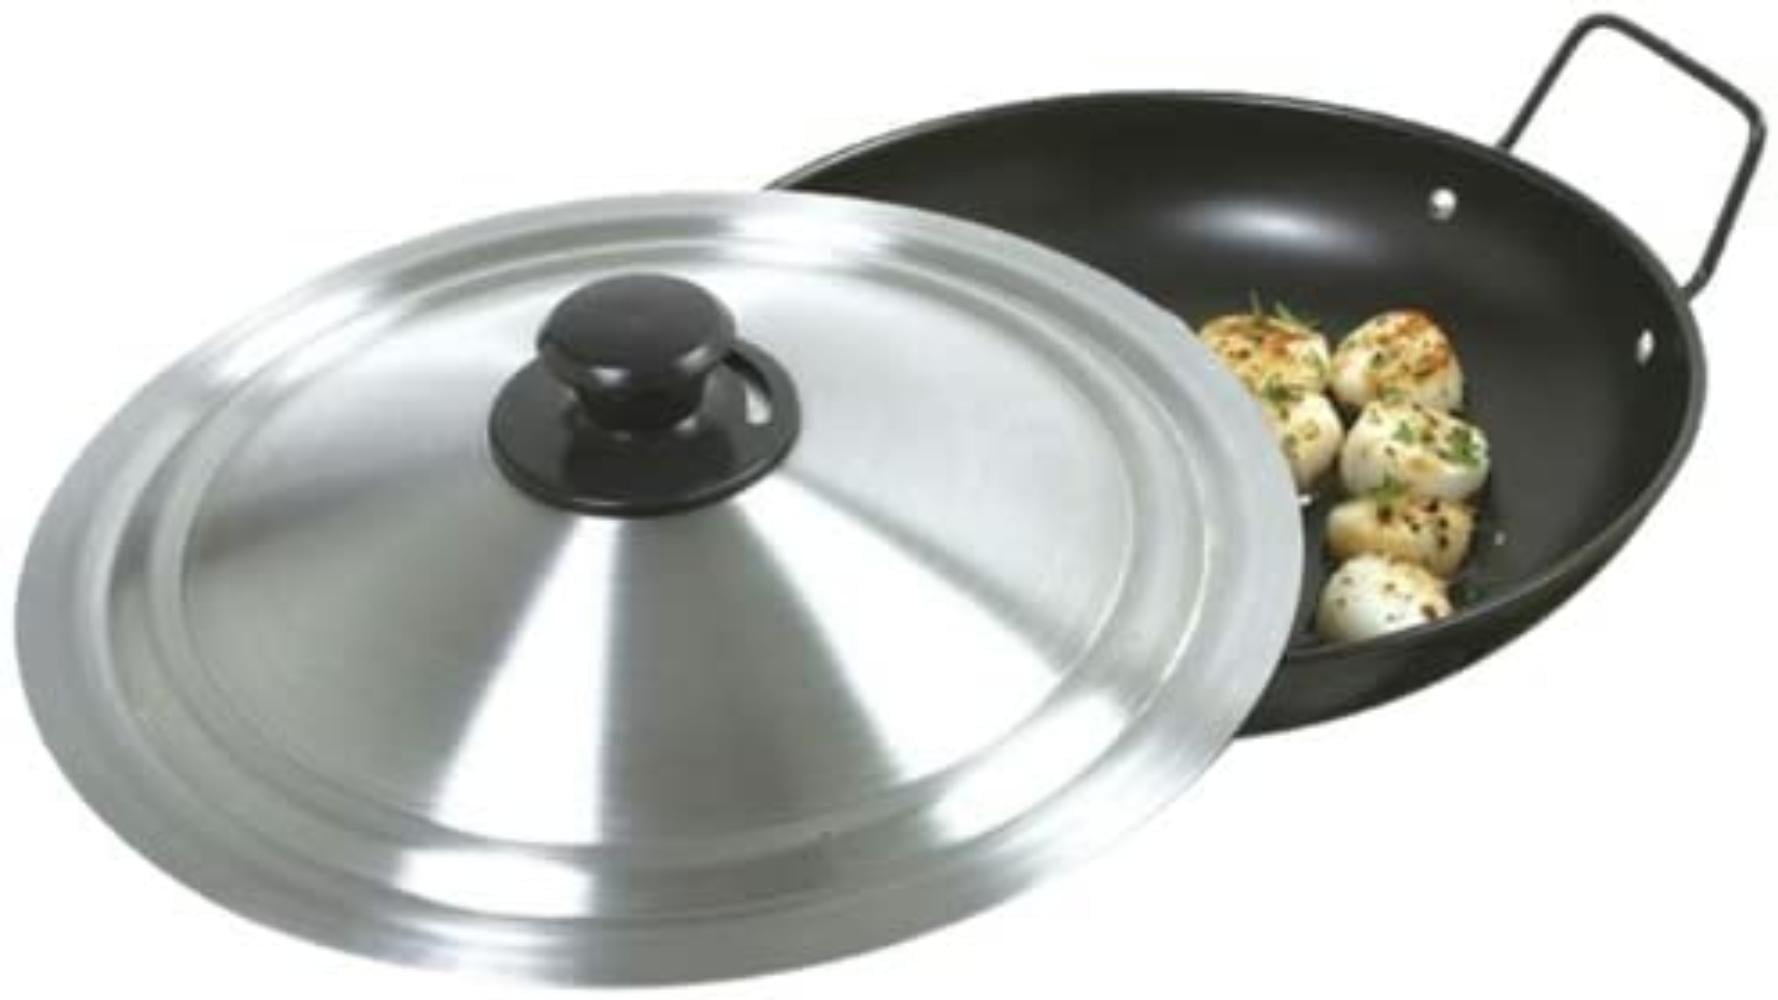 Pot Pan Tempered Glass Lid Cover Cookware Frying Round Assorted Knob Soup Sizes 